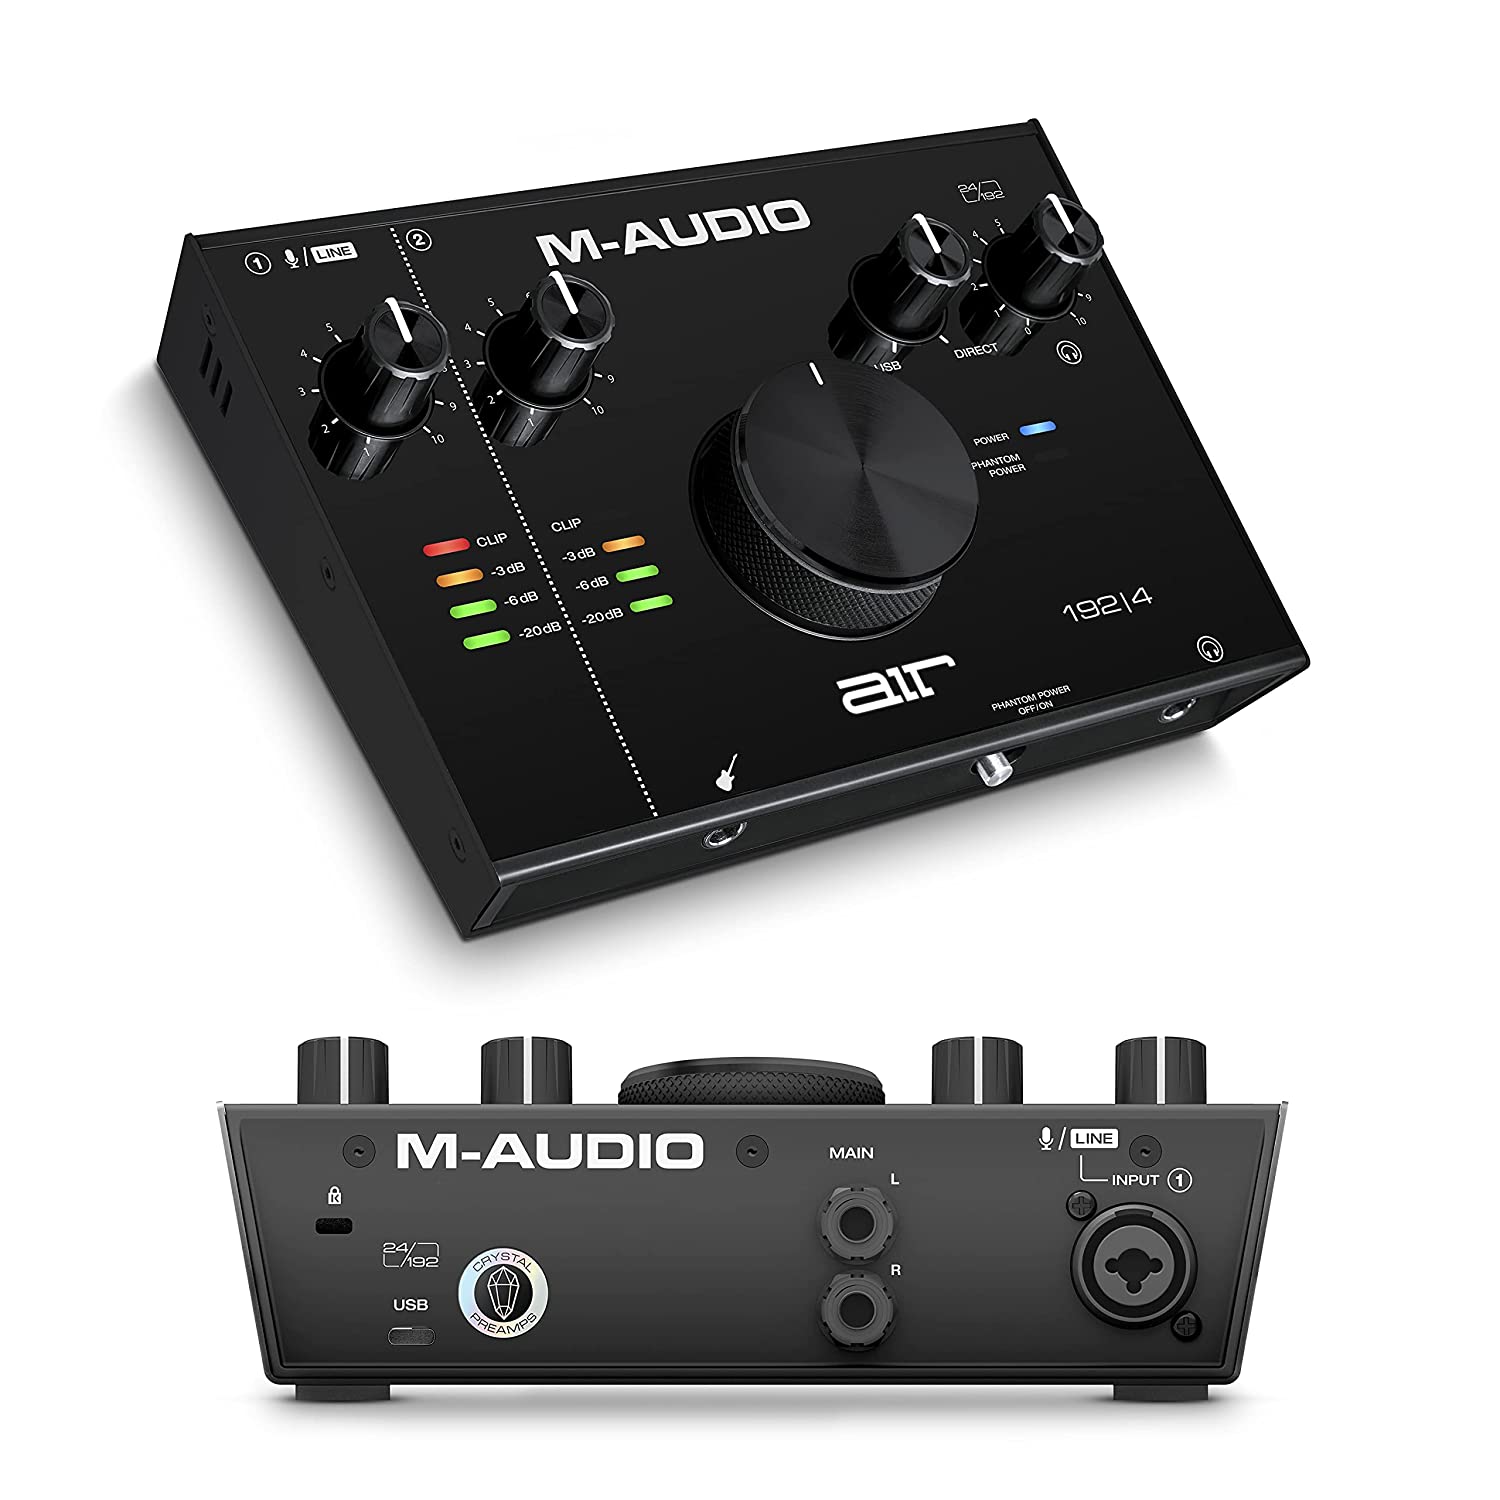 2-In 2-Out USB Audio Interface with Recording Software from ProTools & Ableton Live, Plus Studio-Grade FX & Virtual Instruments